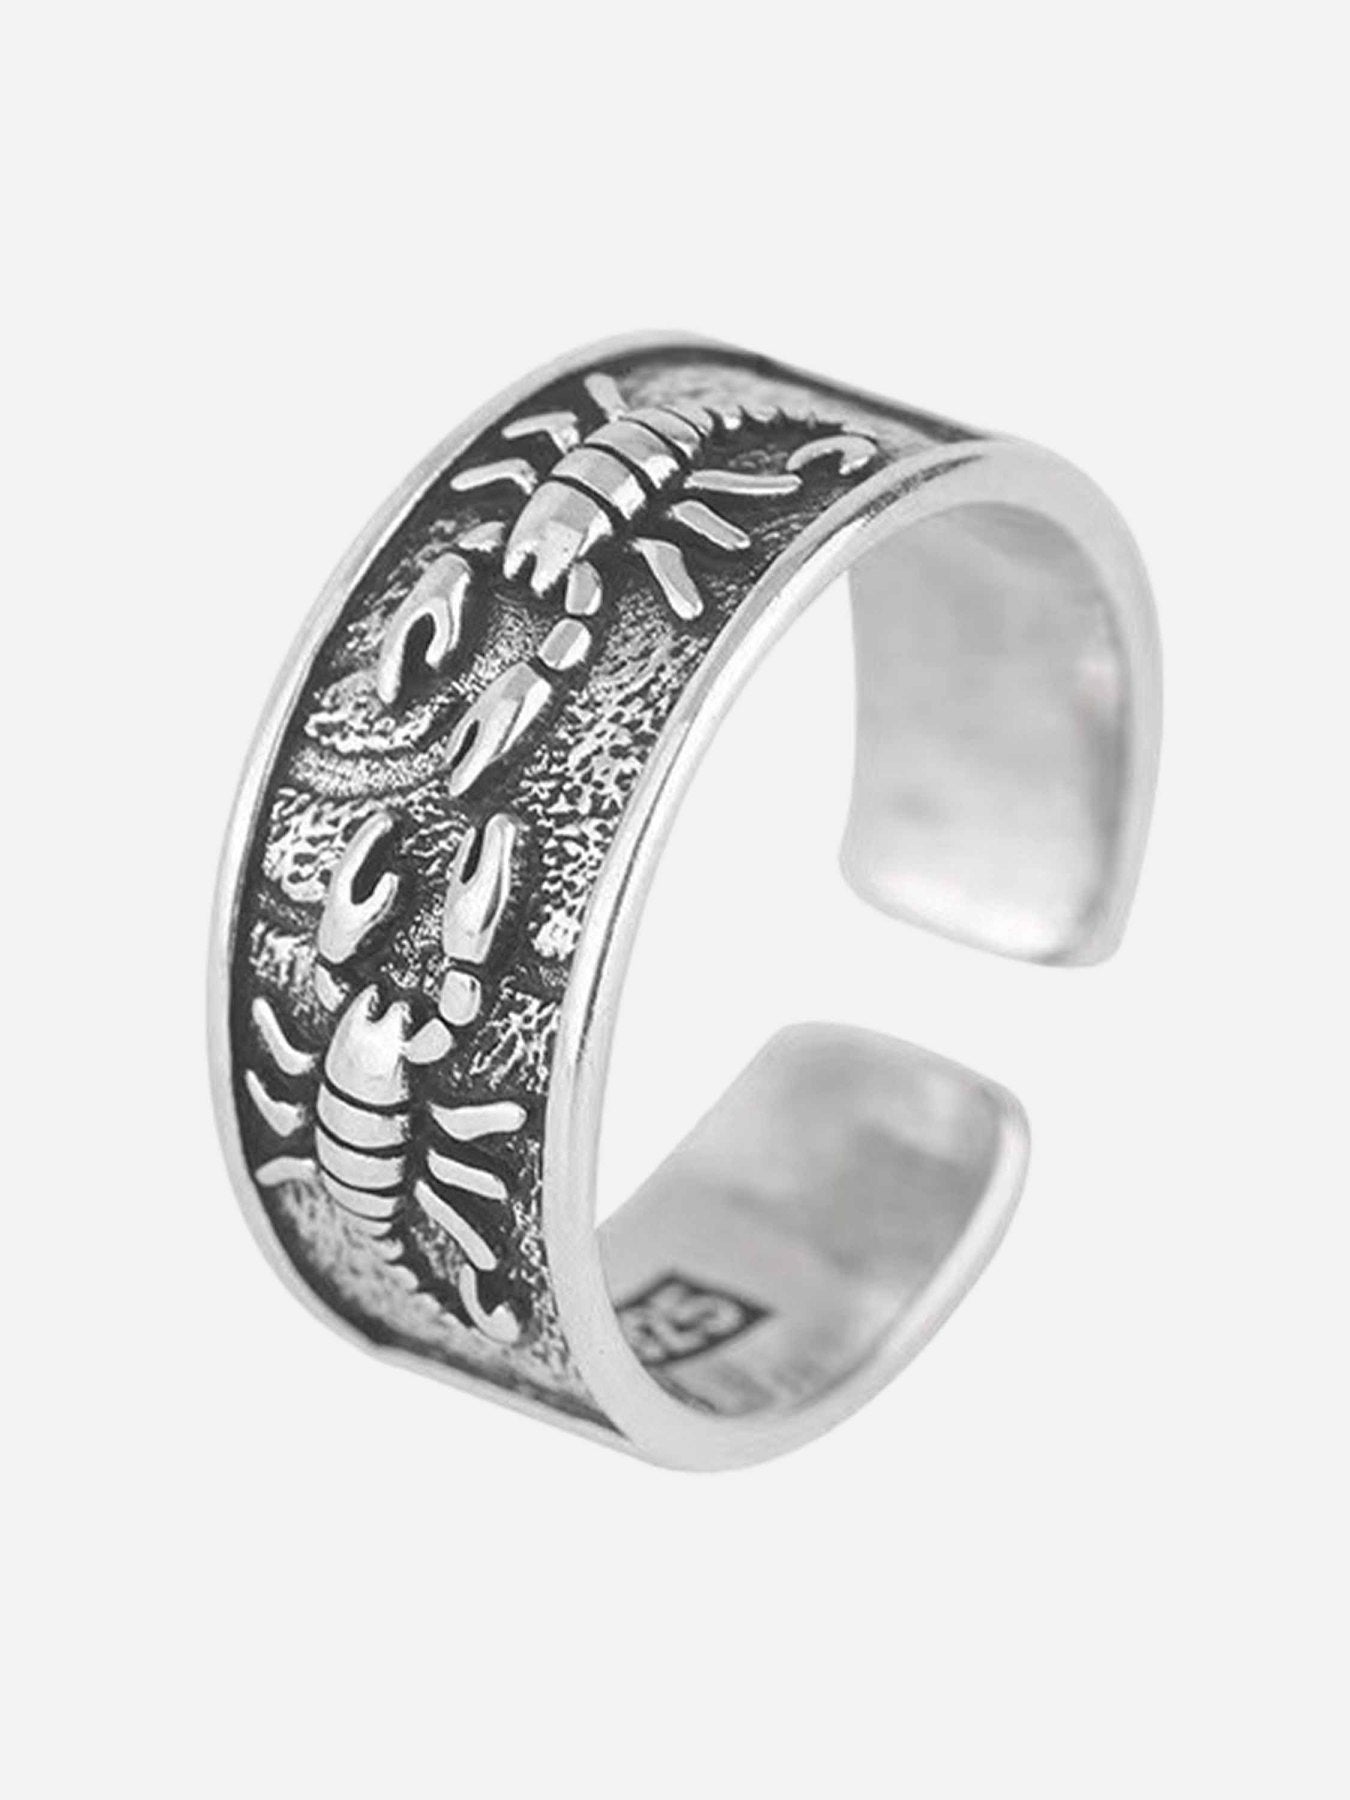 The Supermade Personalized Scorpion Ring